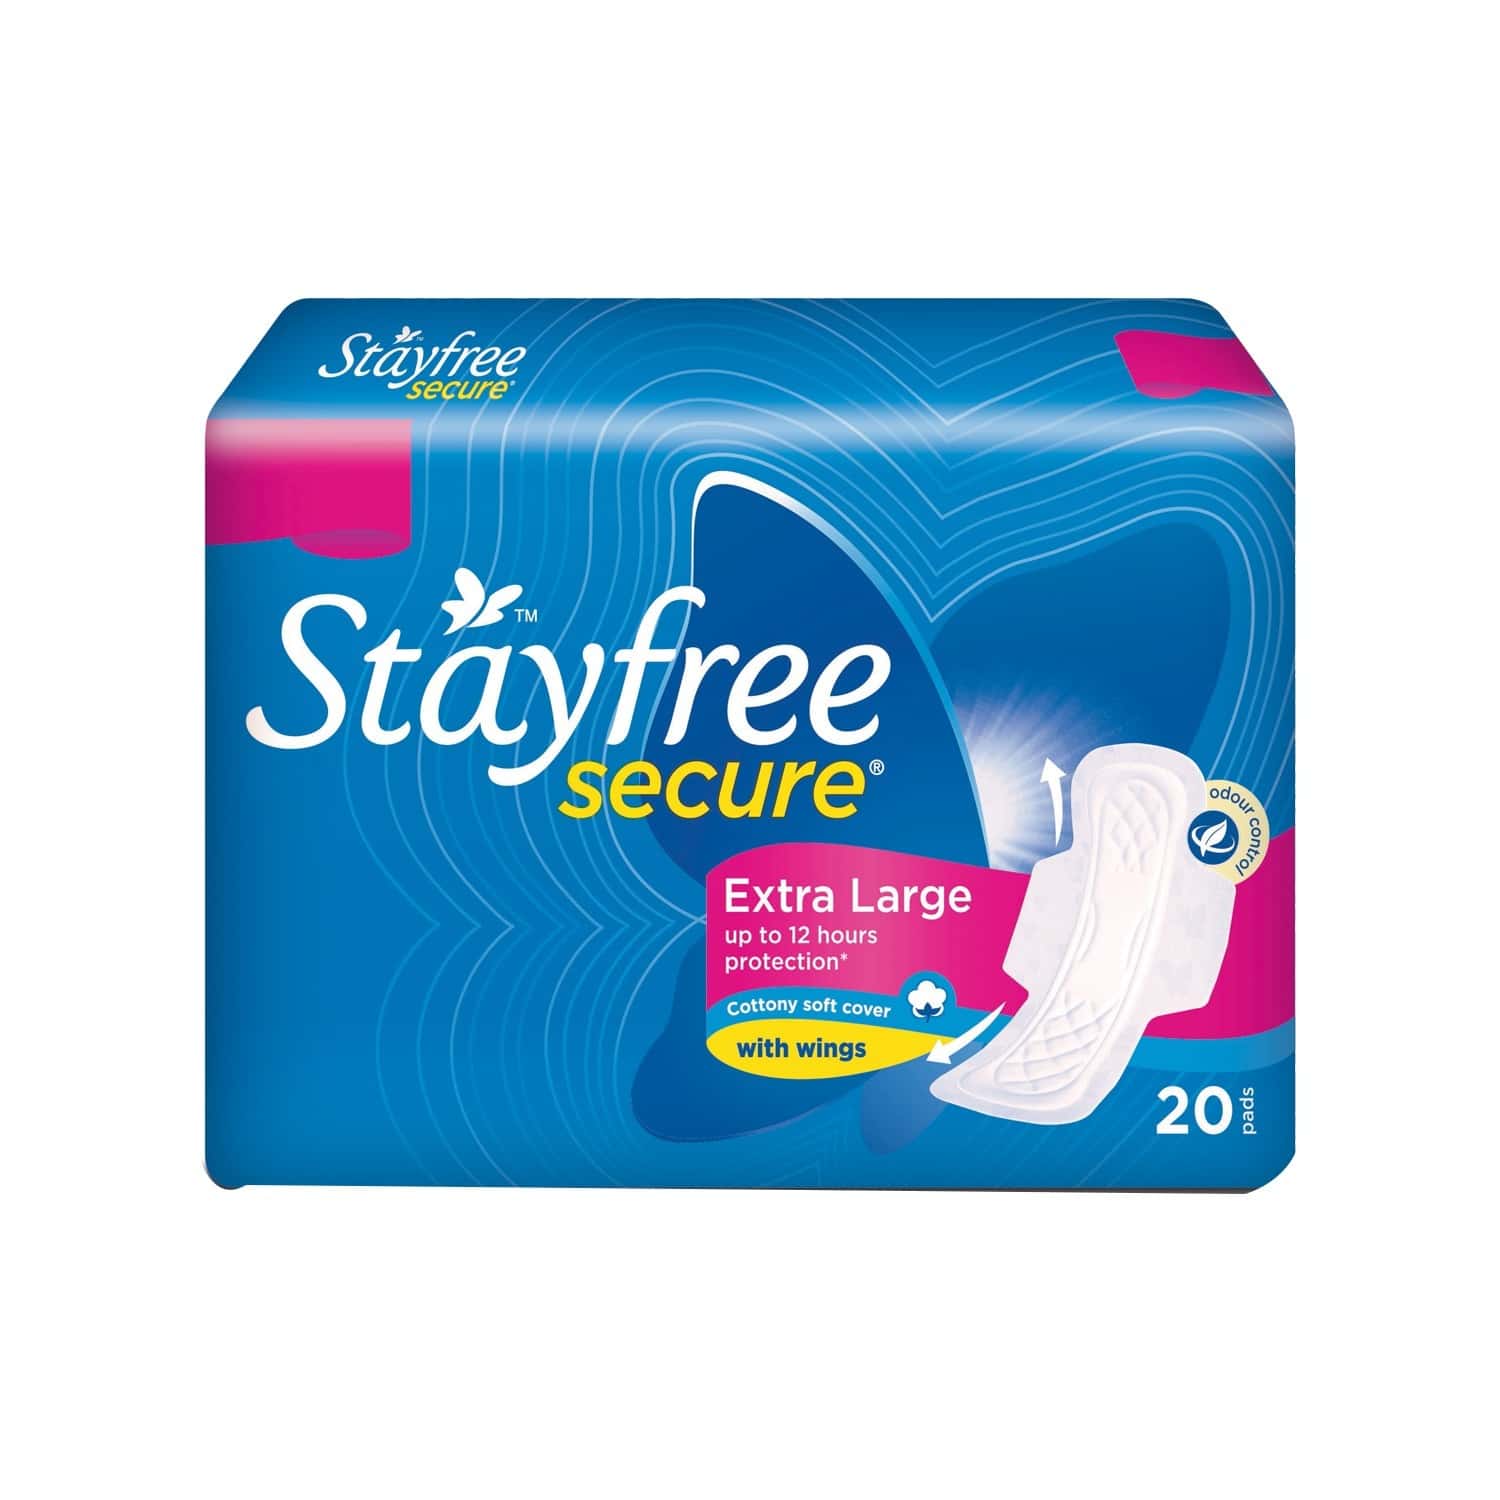 Stayfree Secure Size Xl Sanitary Pads Packet Of 20 - Medanand